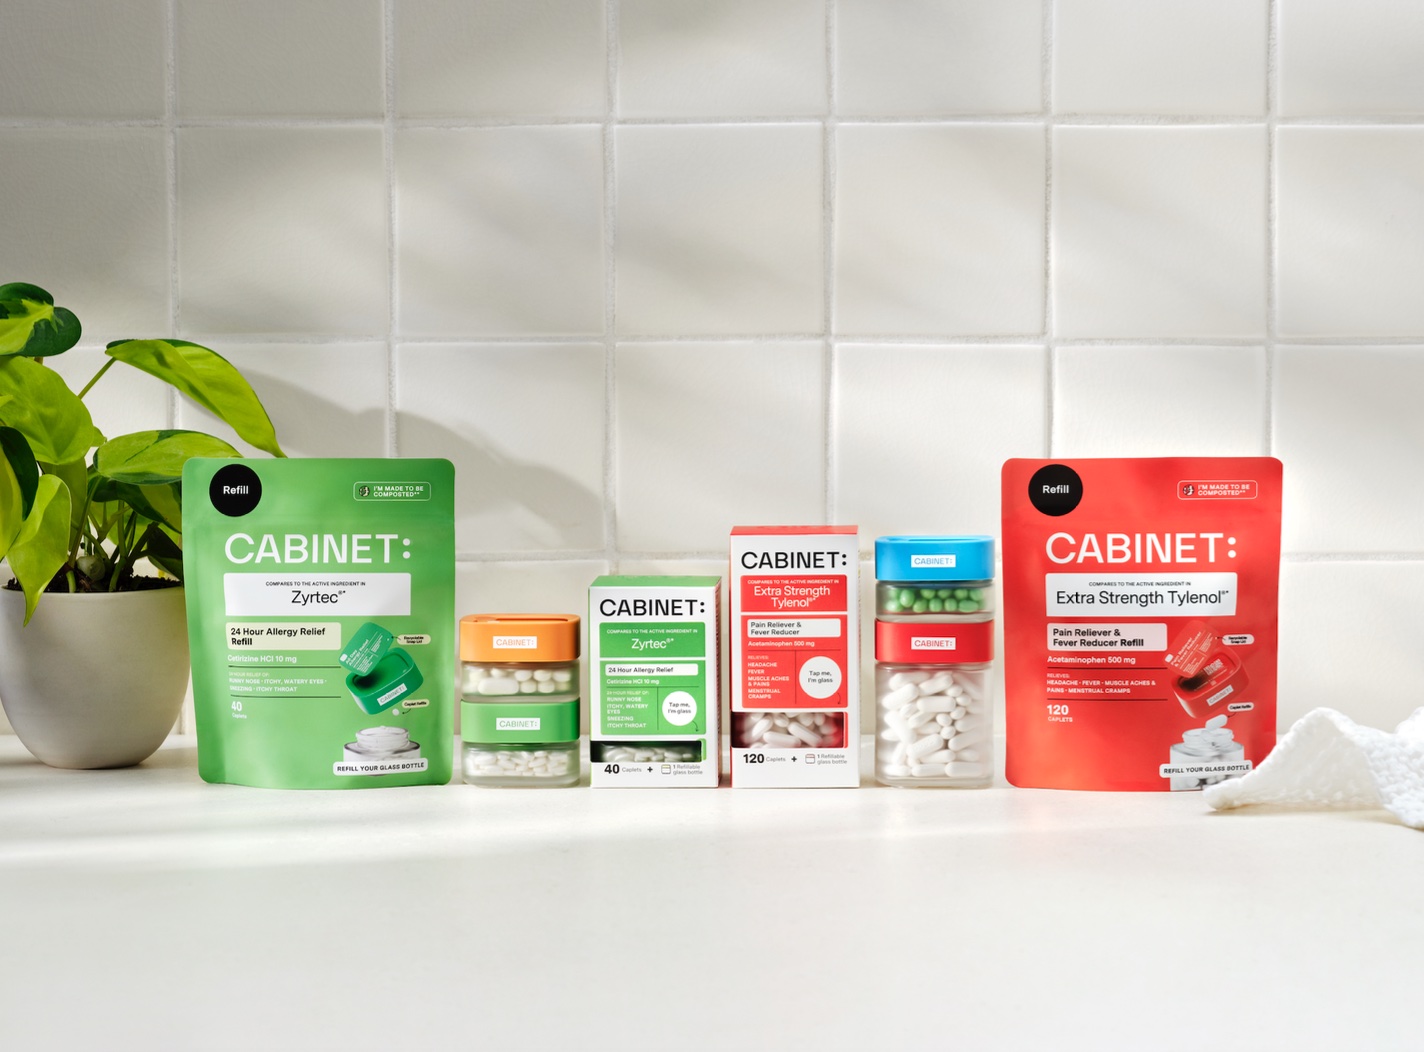 OTC Healthcare Brand Cabinet Brings Its Sustainable Mission to Target (And With an Instructive Packaging Refresh)